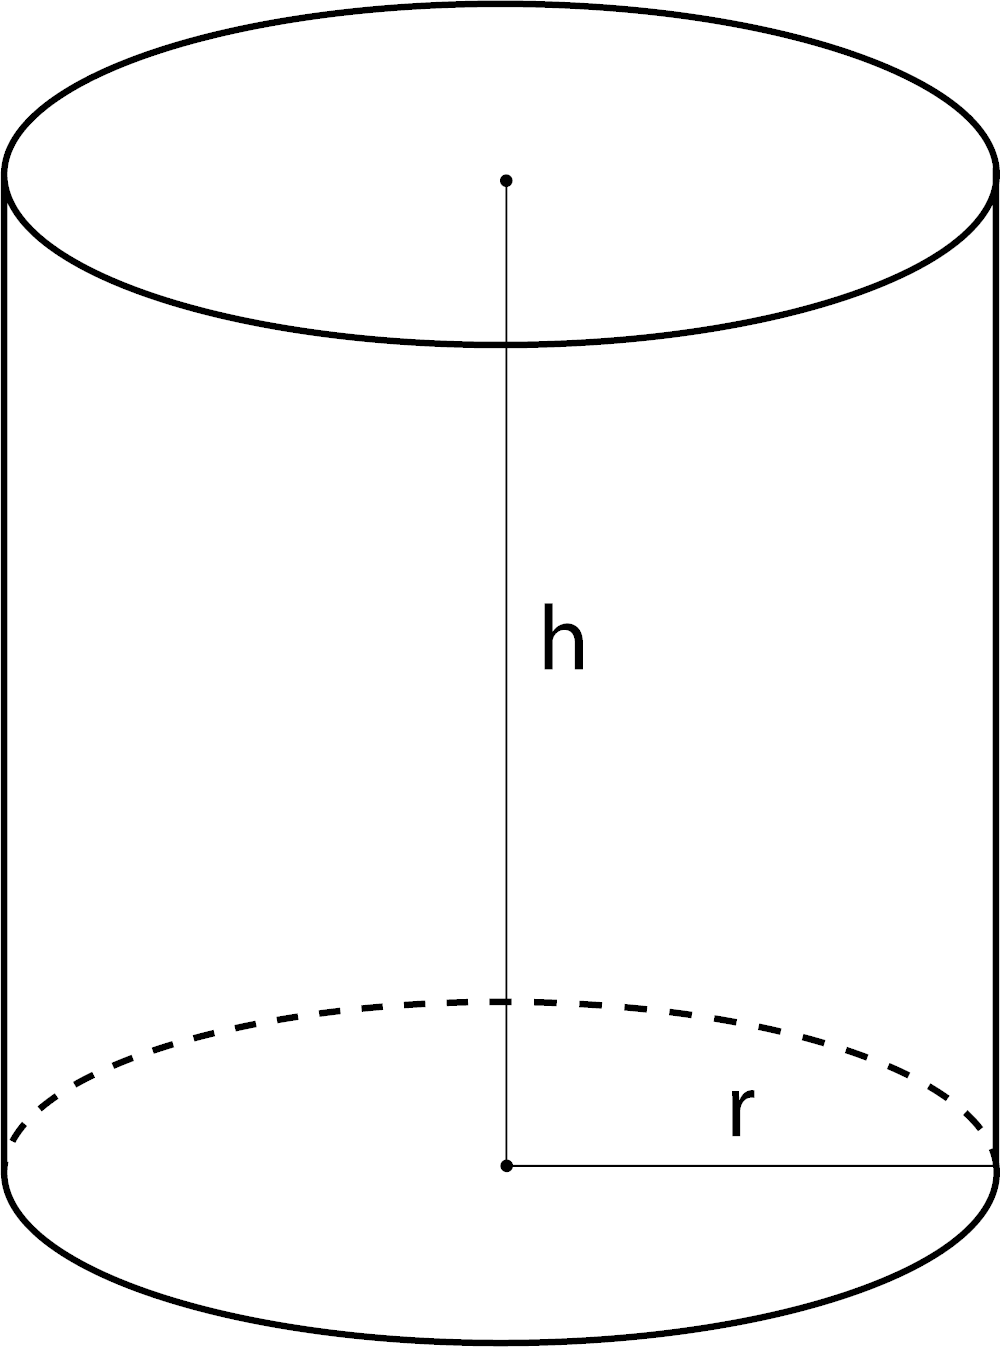 Diagram of a cylinder showing r = radius and h = height